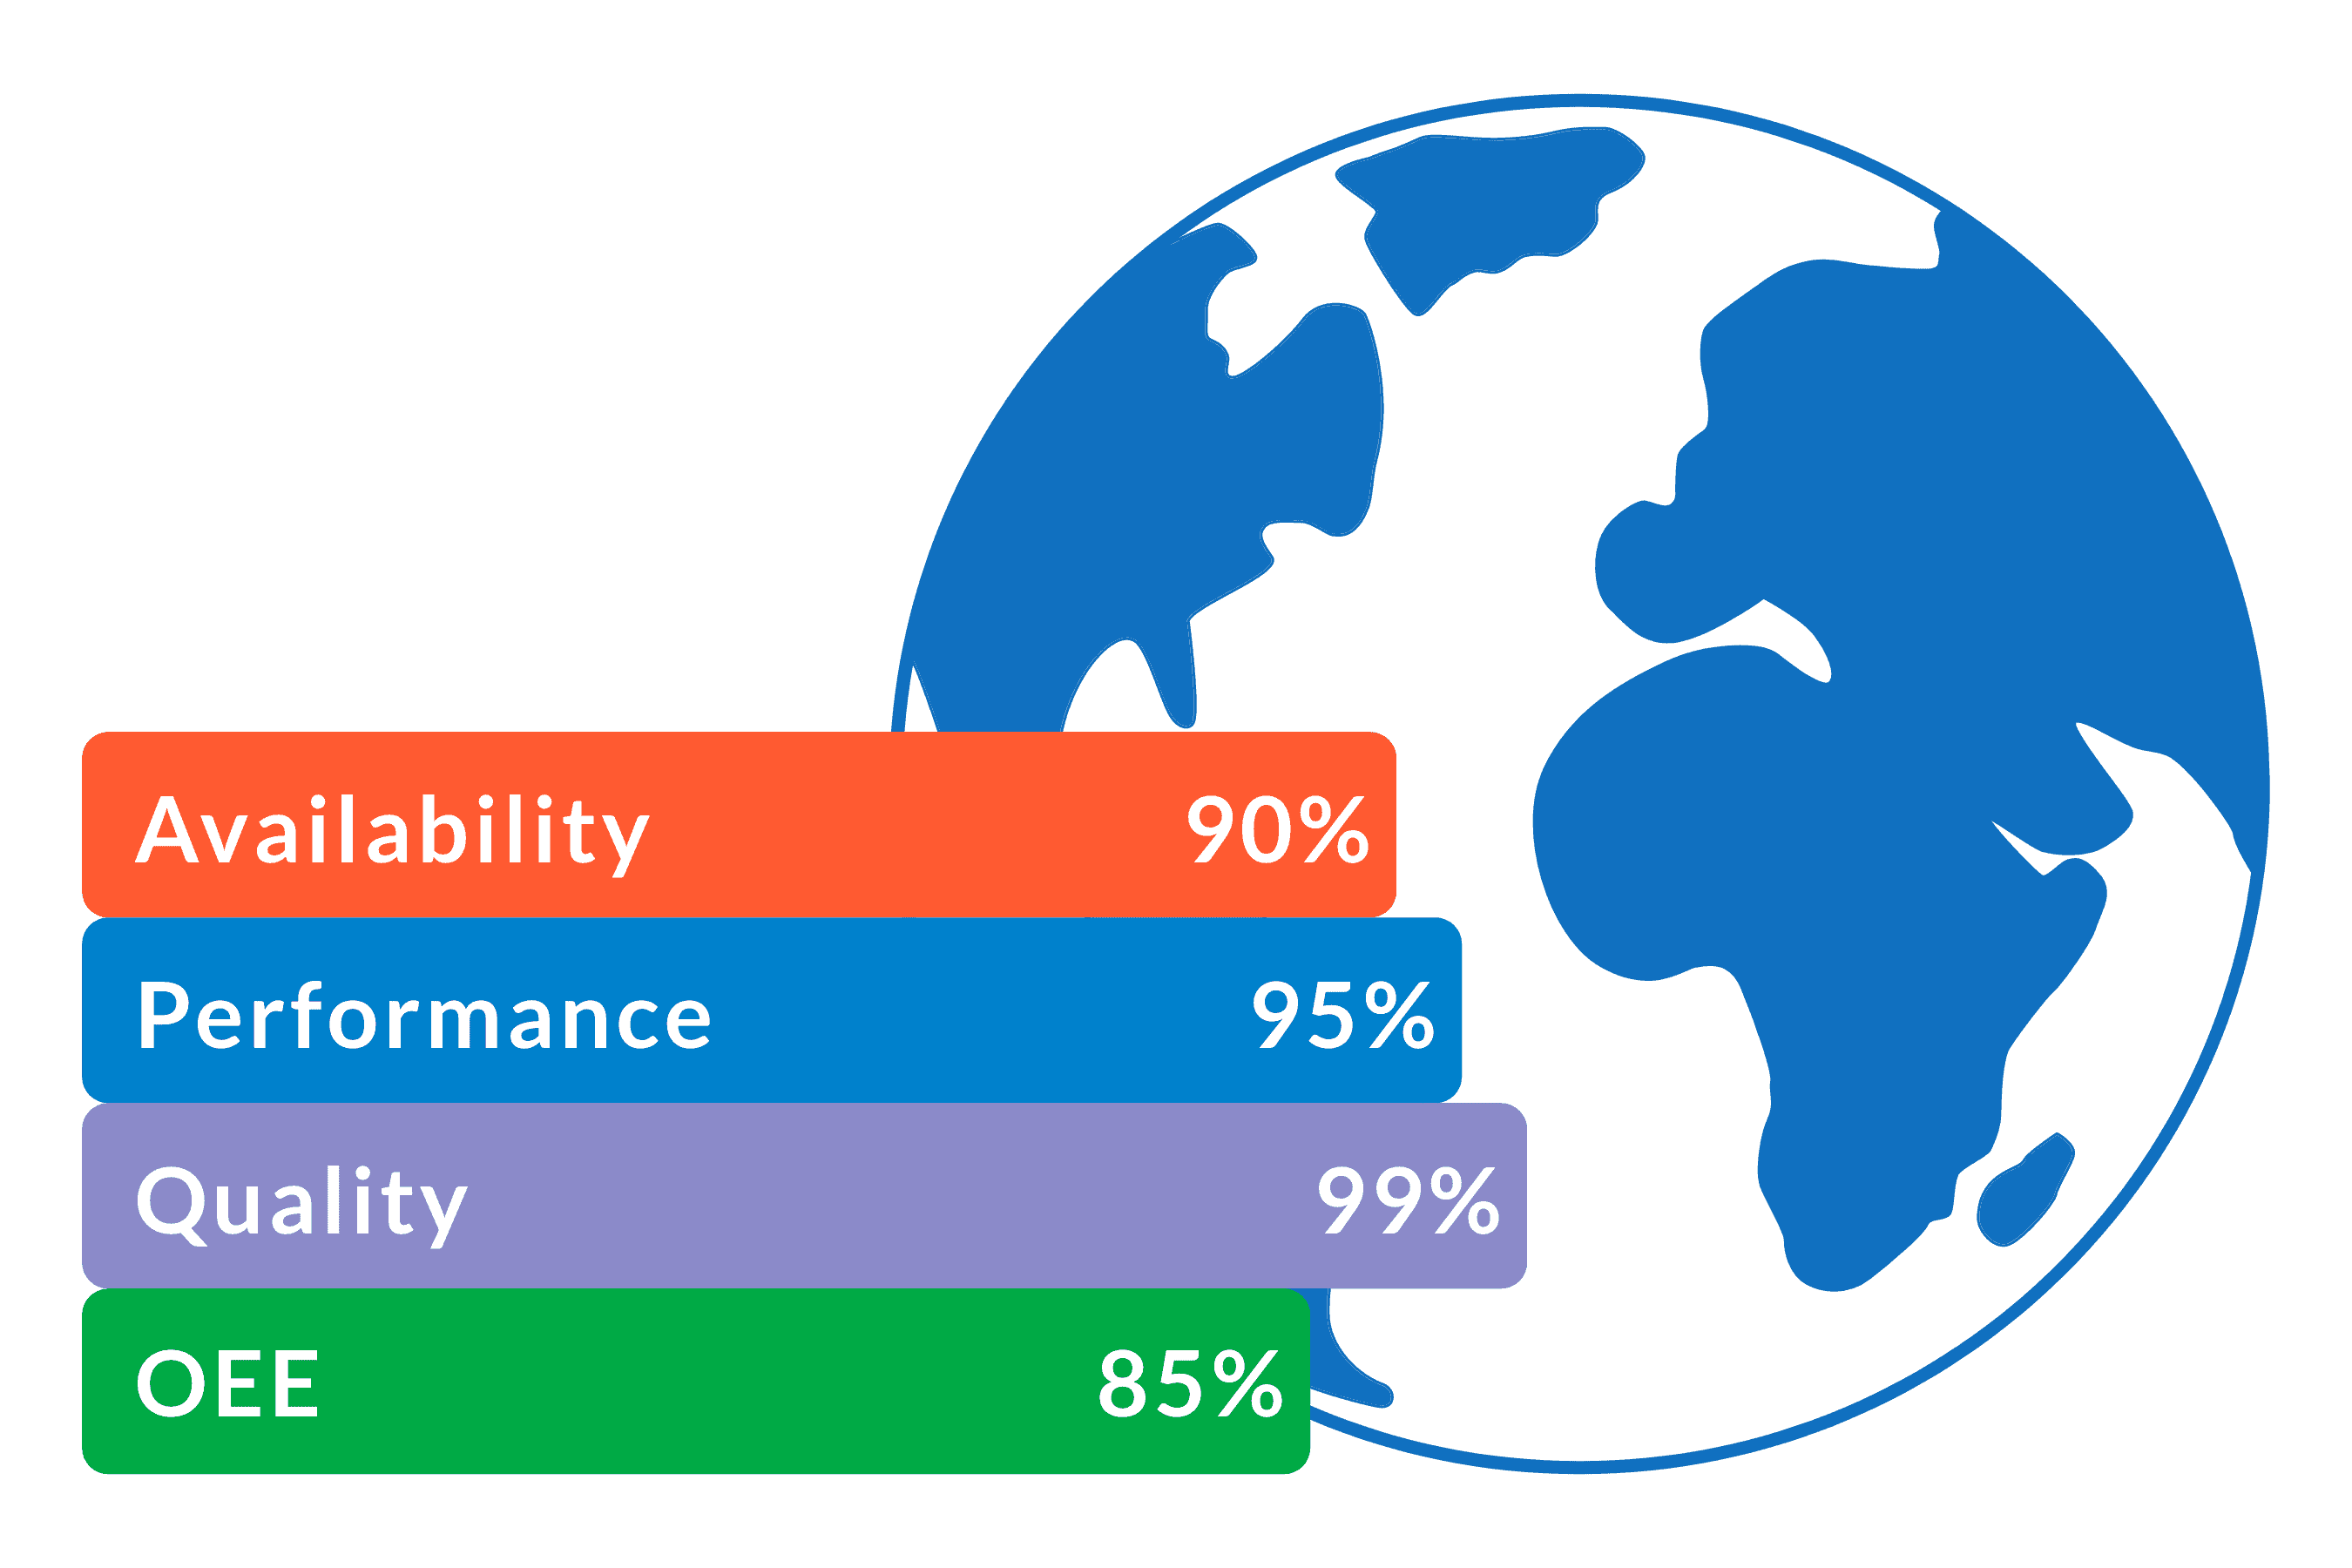 Chart of 85% OEE based on having 90% Availability, 95% Performance, and 99% Quality